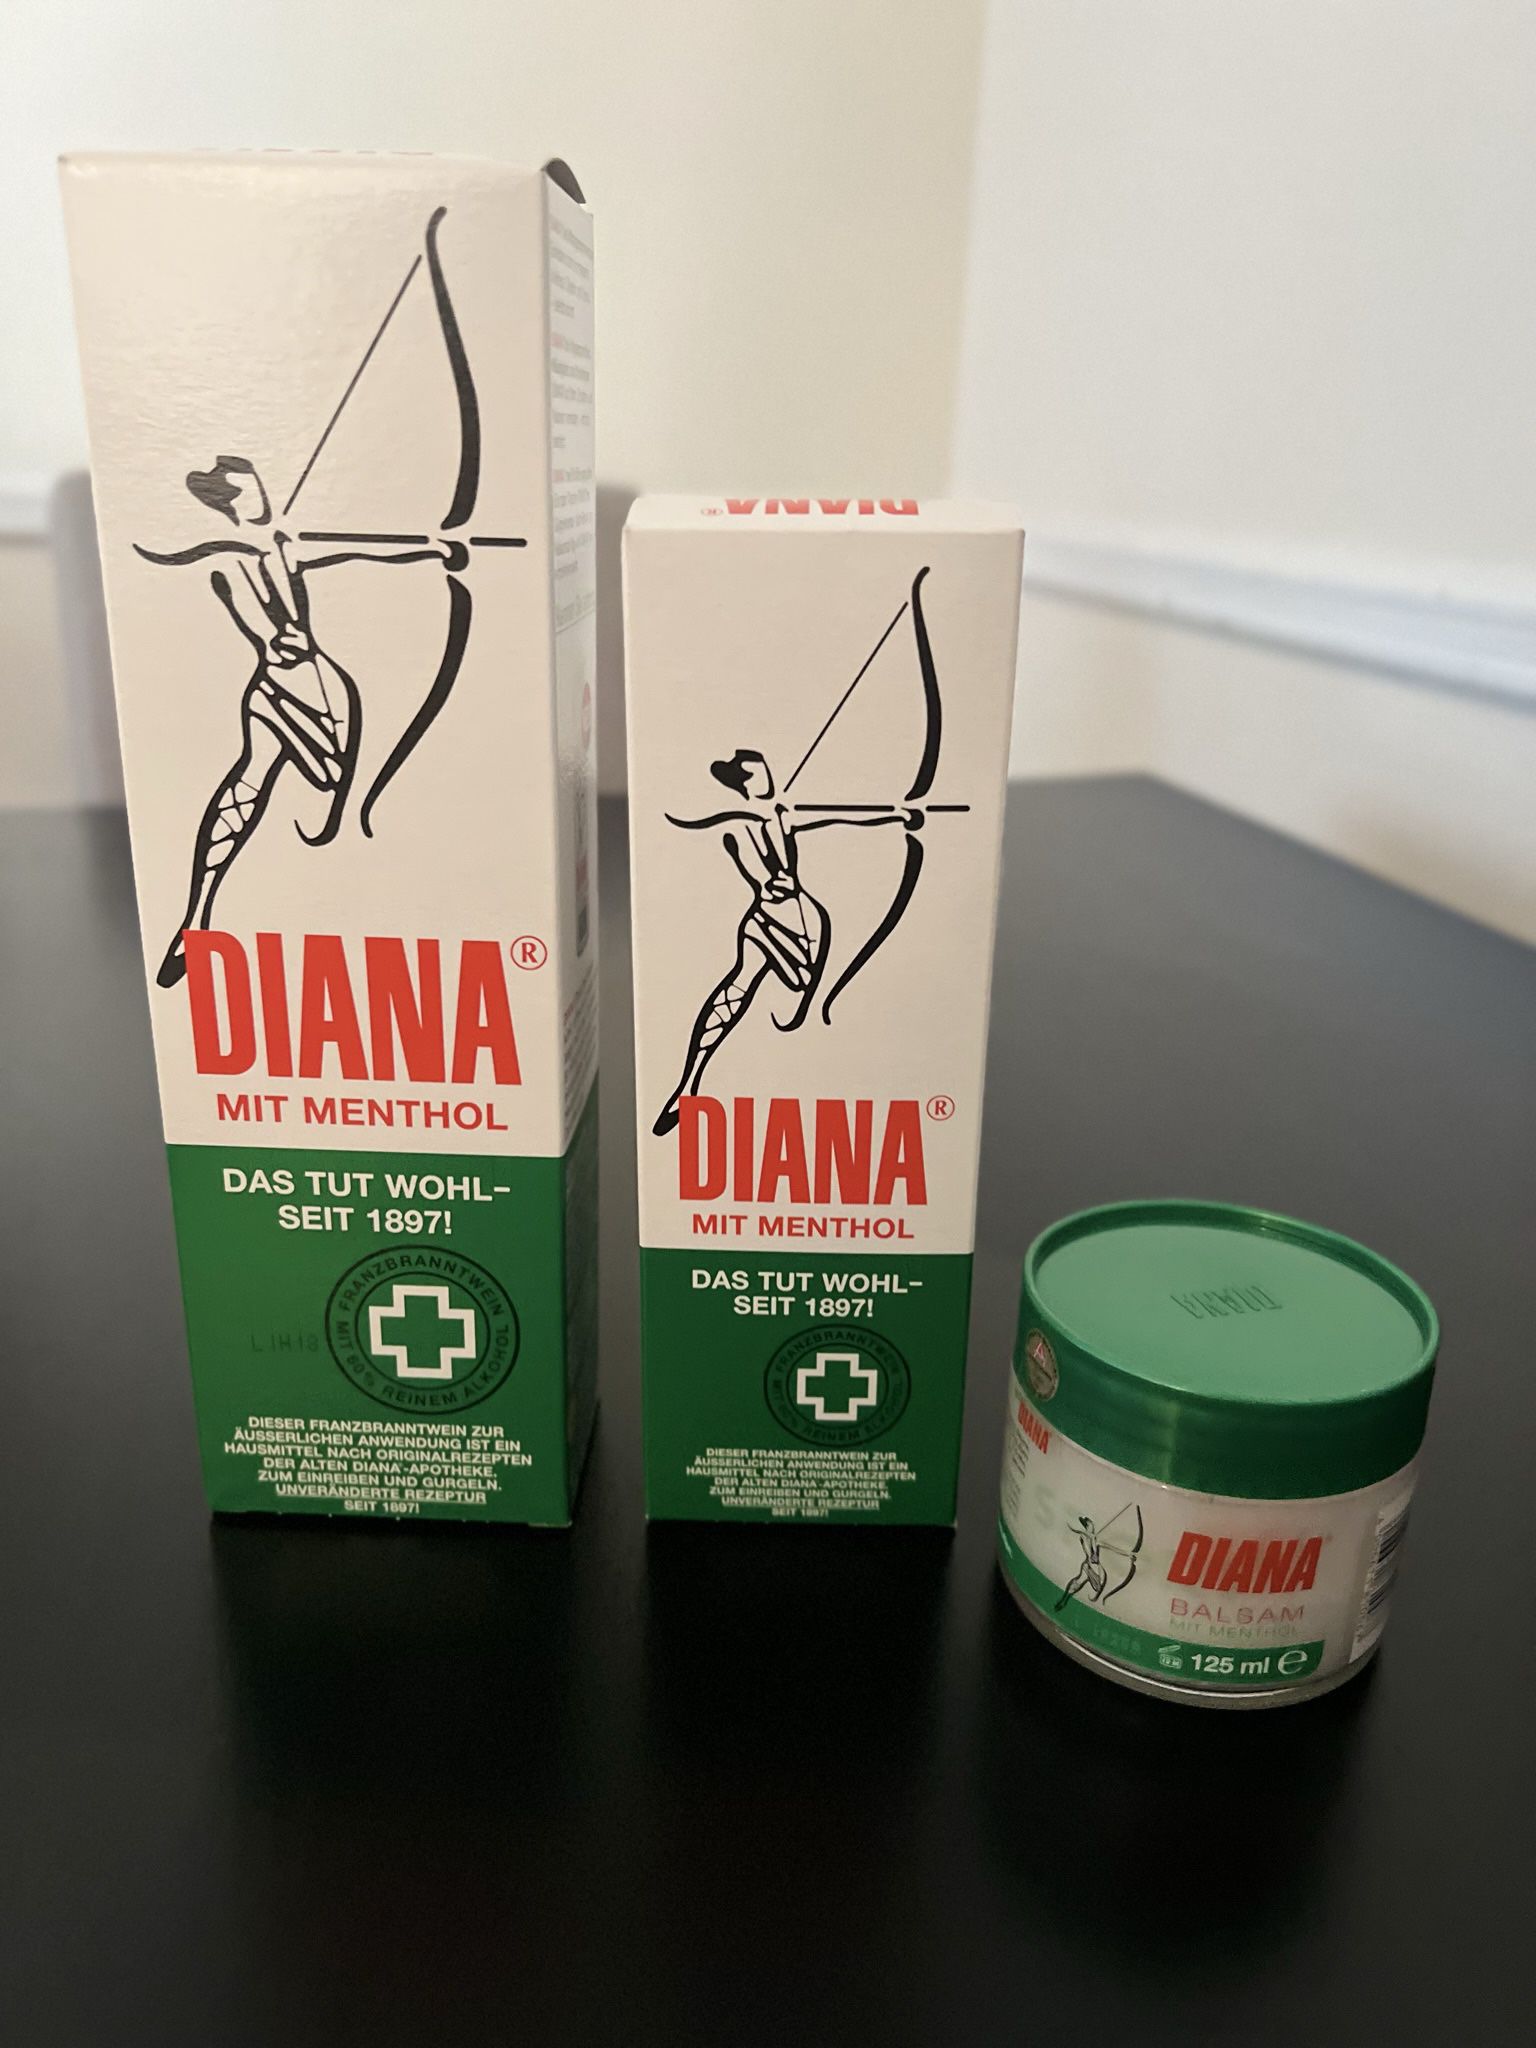 DIANA - Special balsam and liquid for joint pain/osteoporosis/bones/arthritis/also special for athletes.